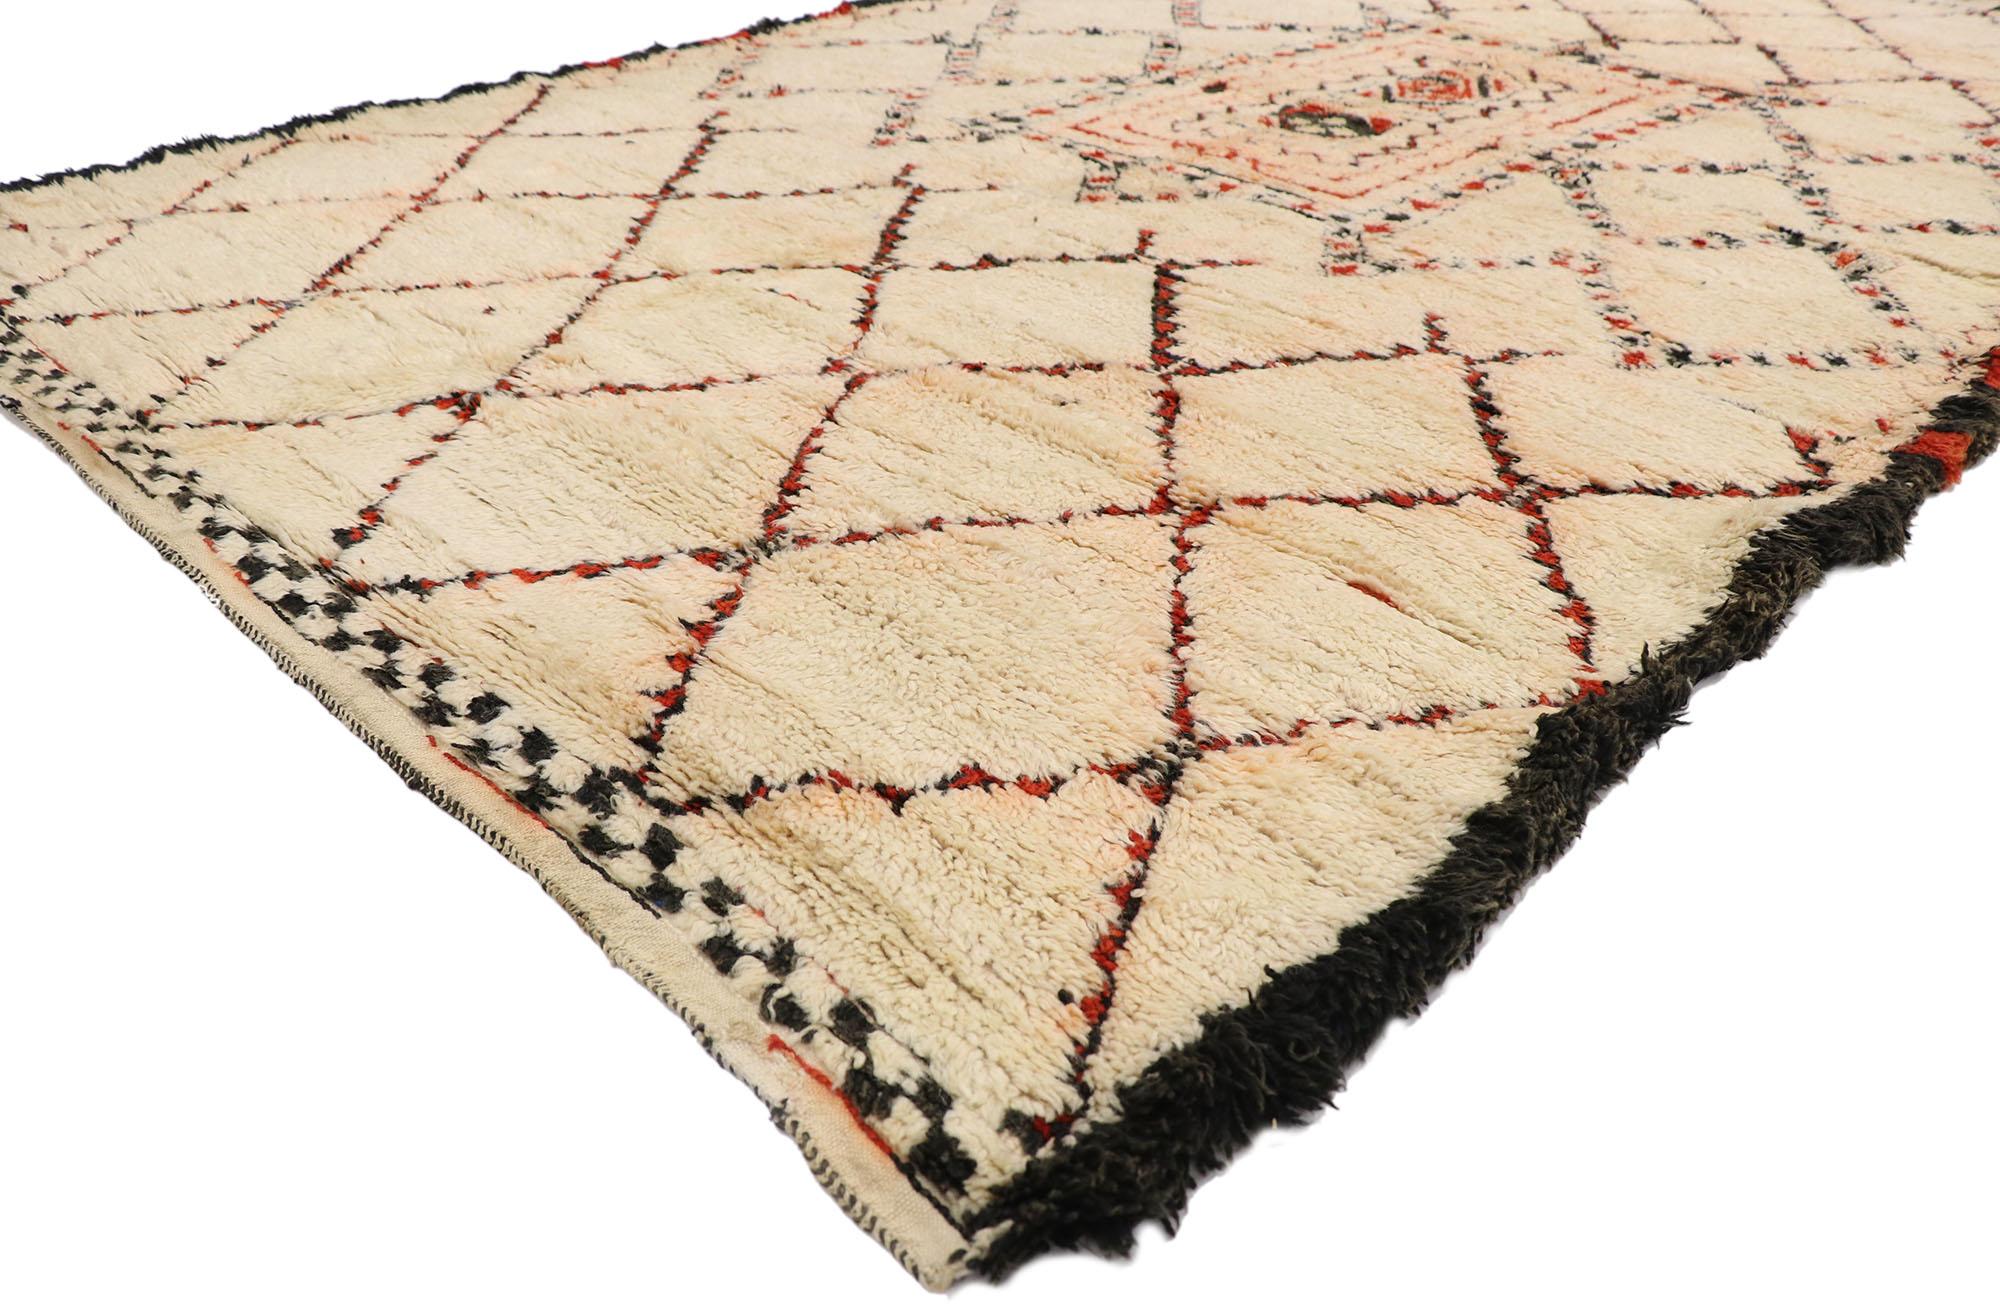 21384 Vintage Berber Beni Ourain Moroccan rug 06'01 x 10'01. With its simplicity, incredible detail and texture, this hand knotted wool vintage Berber Beni Ourain Moroccan rug is a captivating vision of woven beauty. It features a center rectangular